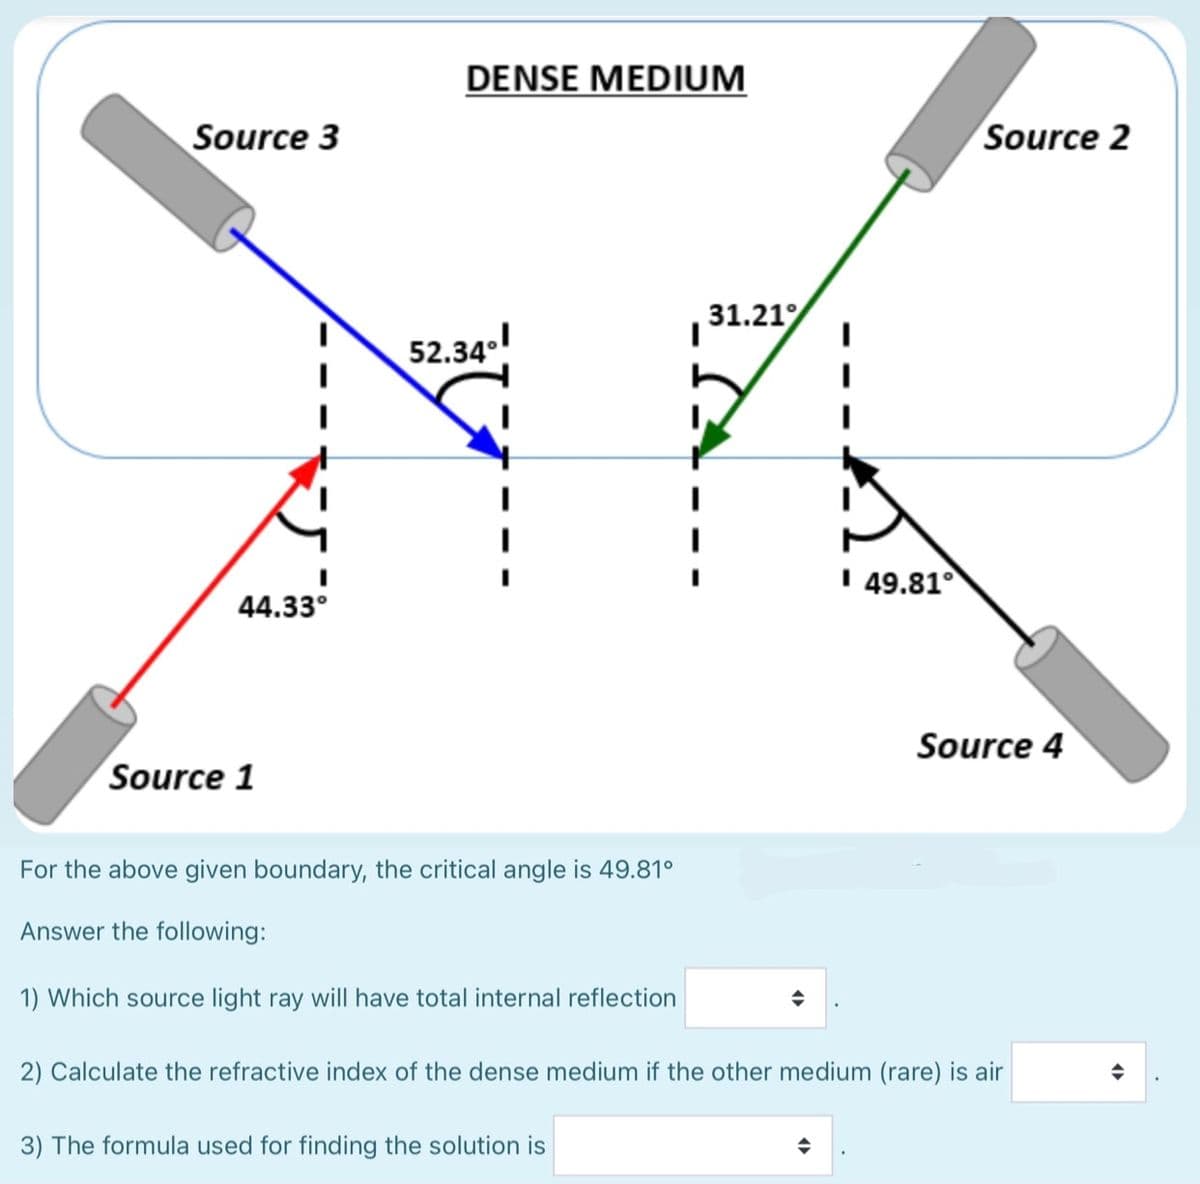 DENSE MEDIUM
Source 3
Source 2
31.21
52.34.l
I 49.81°
44.33°
Source 4
Source 1
For the above given boundary, the critical angle is 49.81°
Answer the following:
1) Which source light ray will have total internal reflection
2) Calculate the refractive index of the dense medium if the other medium (rare) is air
3) The formula used for finding the solution is
